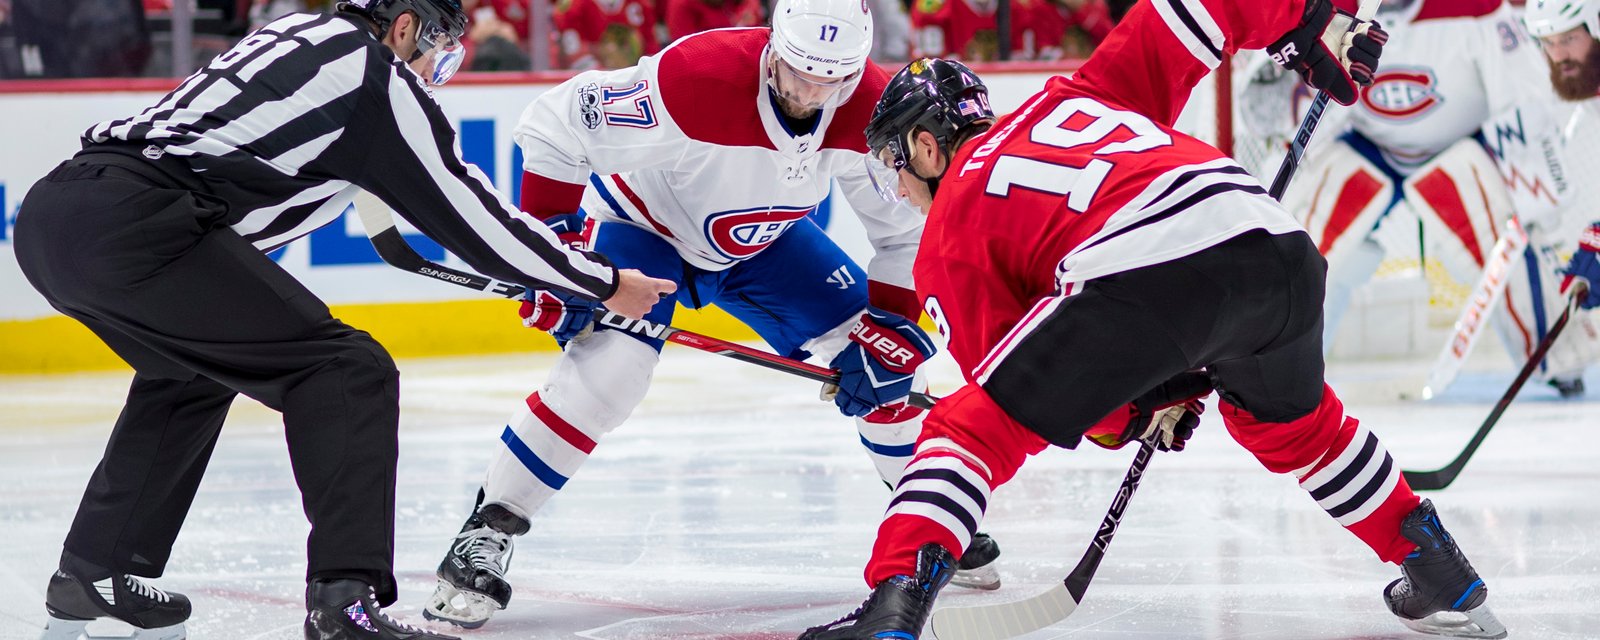 Is there a trade brewing between the Habs and Blackhawks?